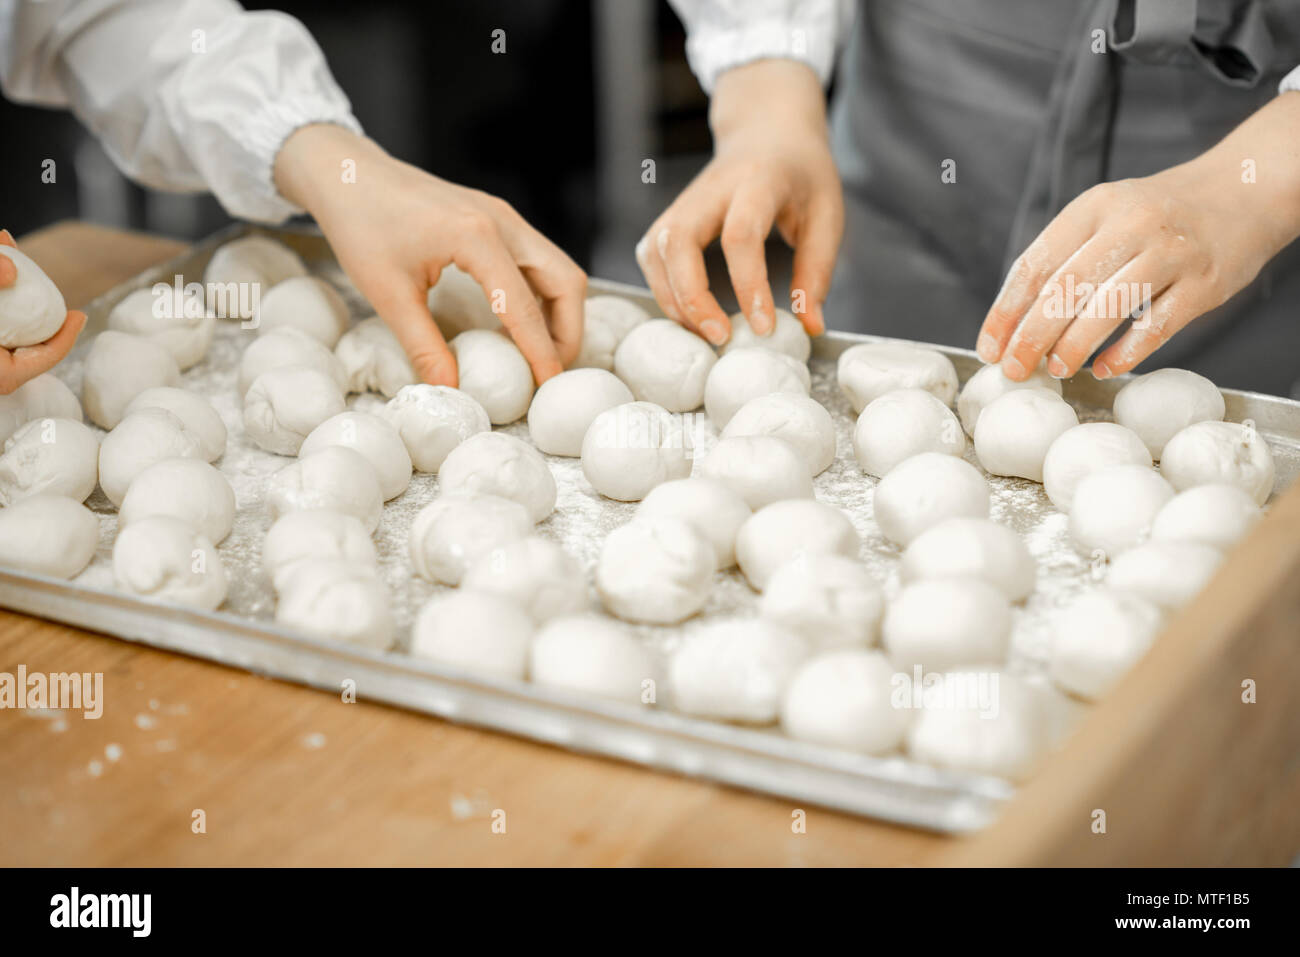 Forming daugh balls for baking buns on the wooden table at the manufacturing Stock Photo